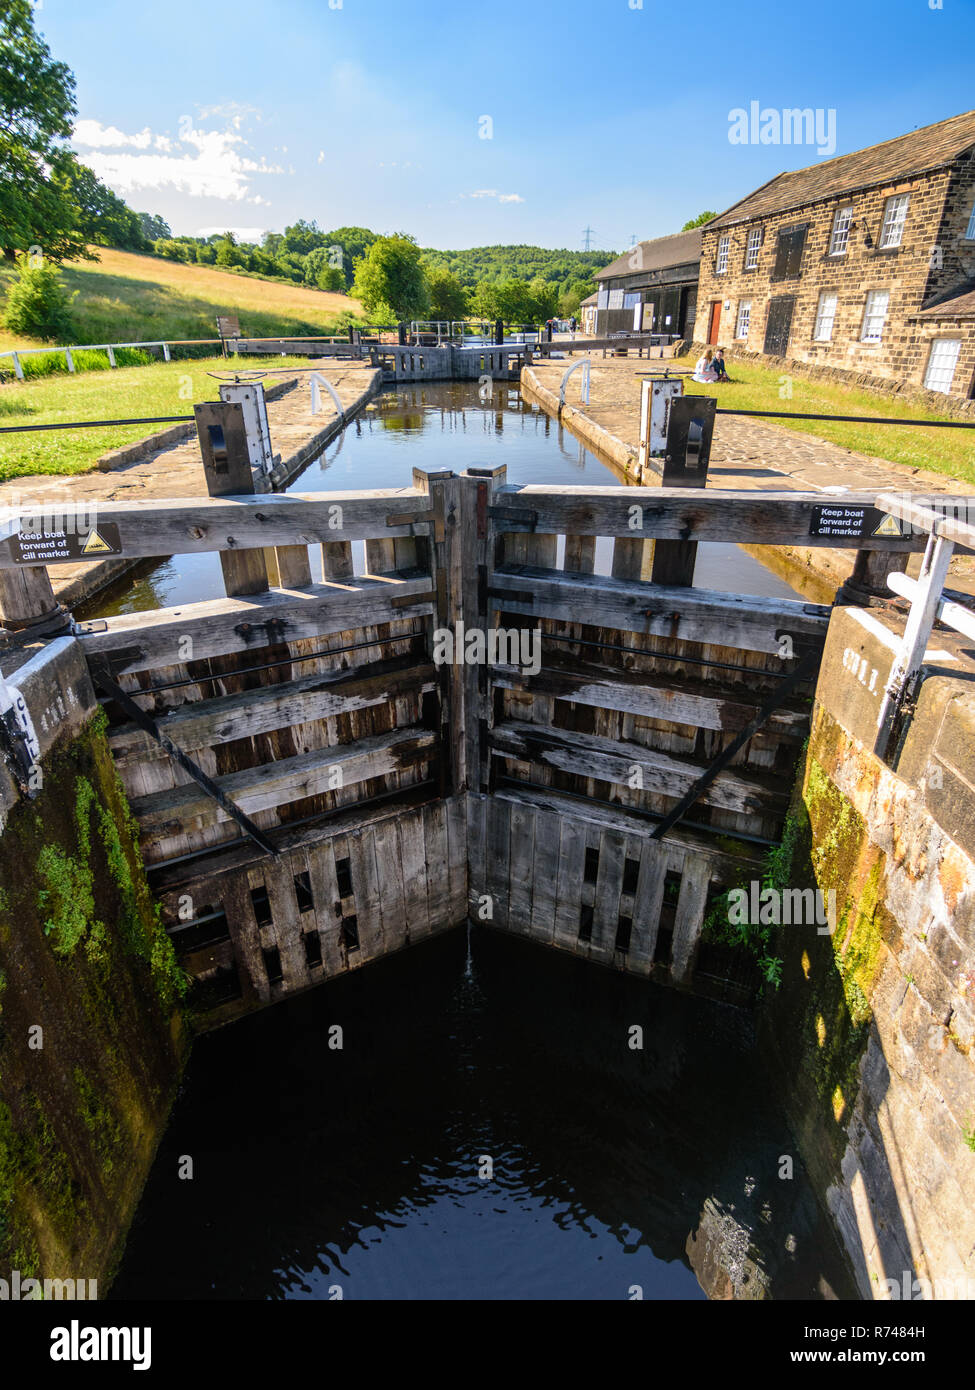 Leeds, England, UK - June 30, 2015: The staircase locks and Lock Keeper's Cottages at Dobson Locks on the Leeds and Liverpool Canal in the Leeds/Bradf Stock Photo